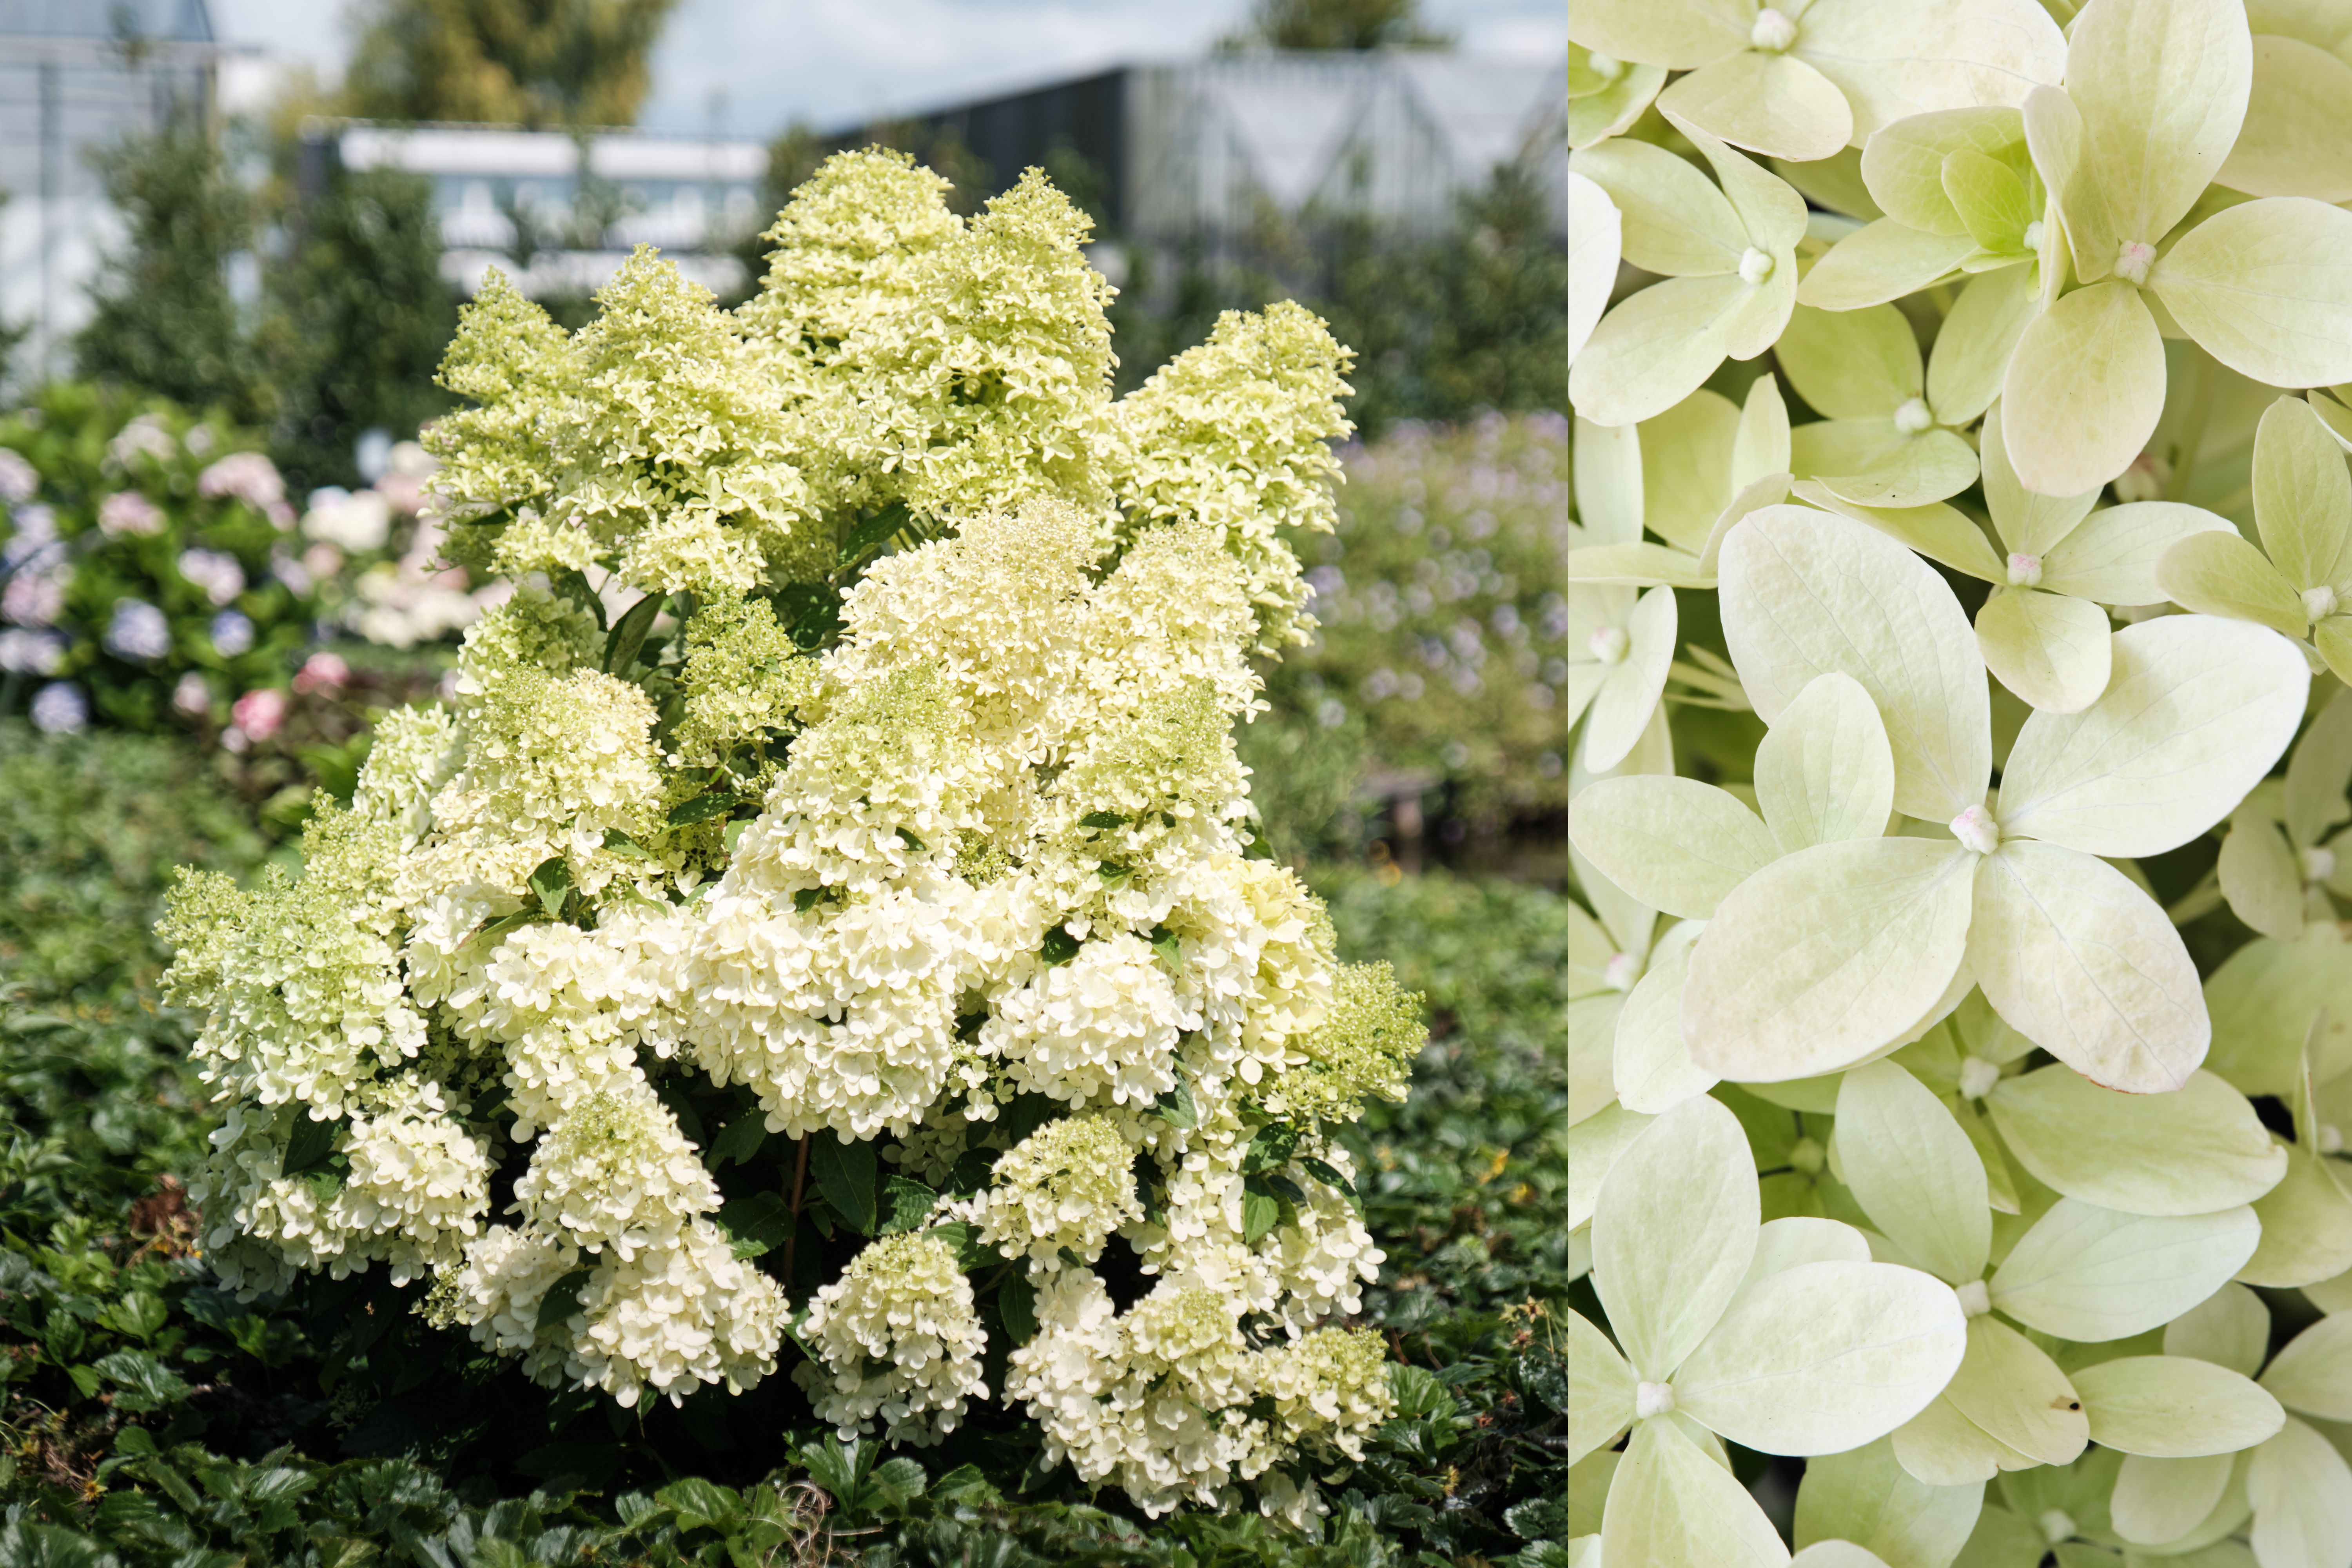 images/plants/hydrangea/hyd-magical-lime-sparkle/hyd-pan-magical-lime-sparkle-0004.jpg